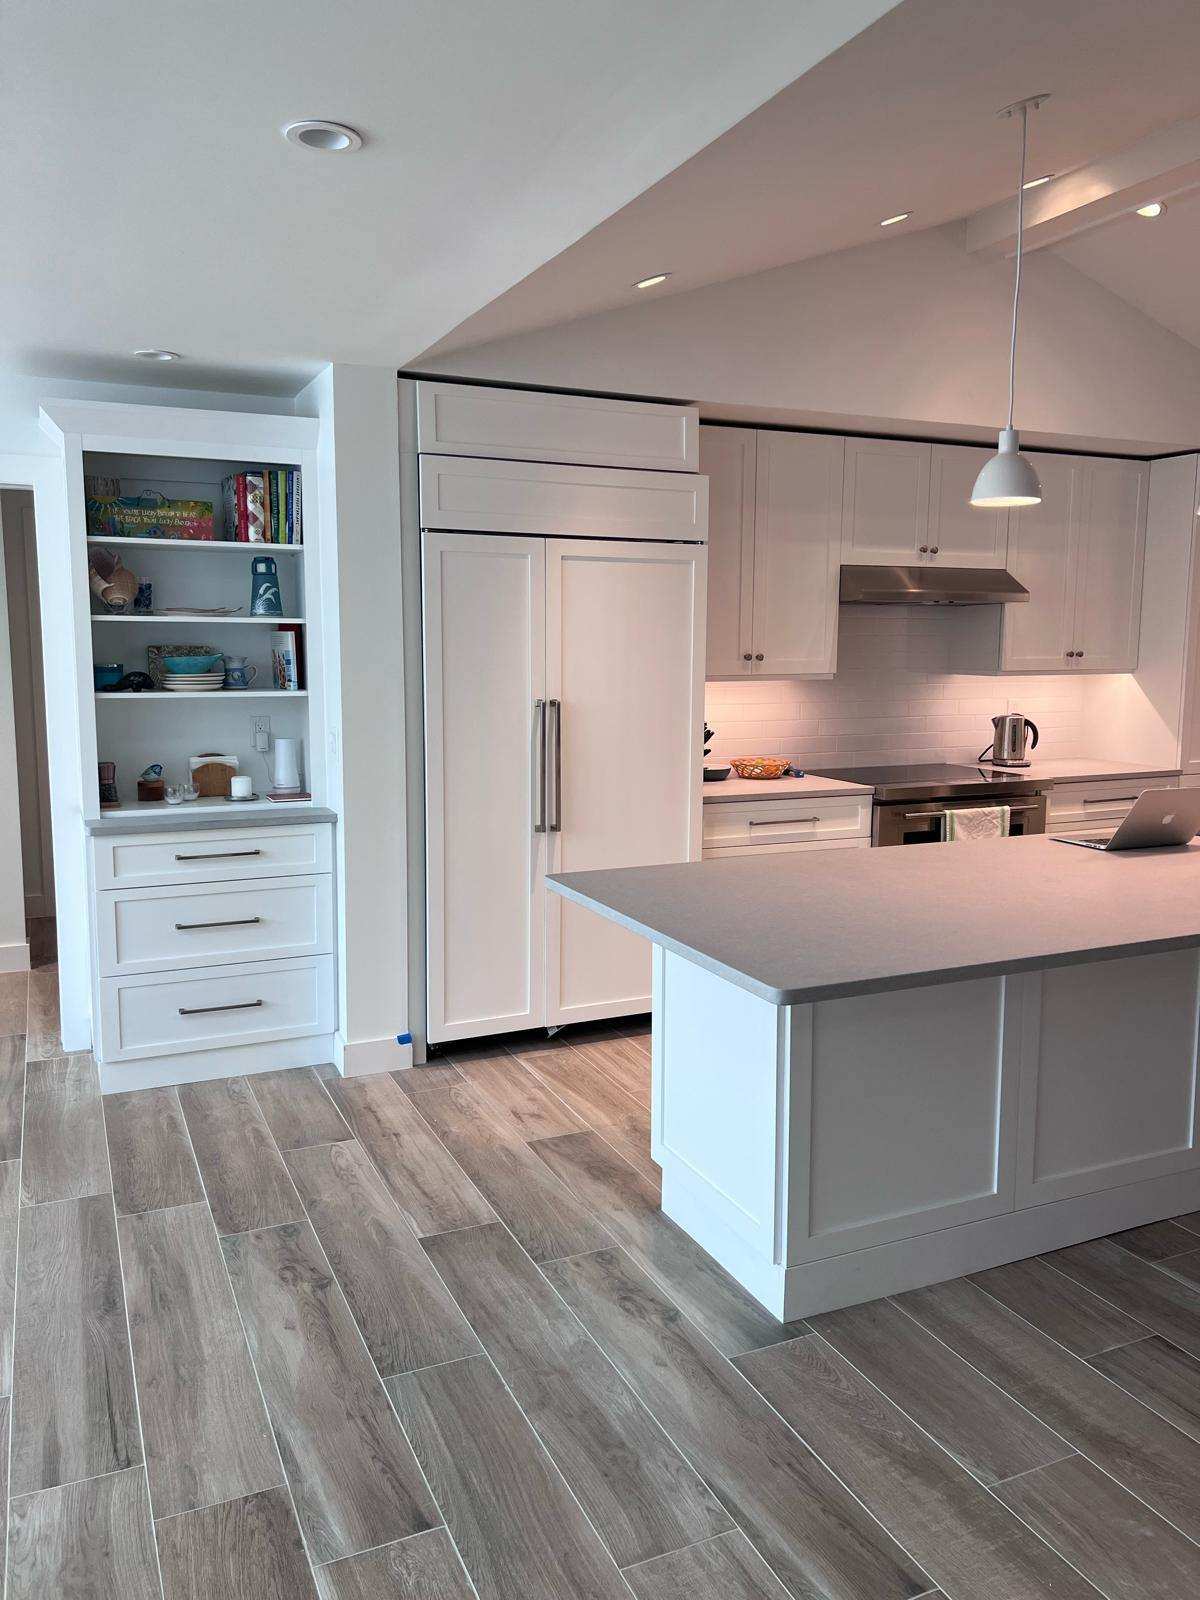 a kitchen with a wood floor and white cabinets